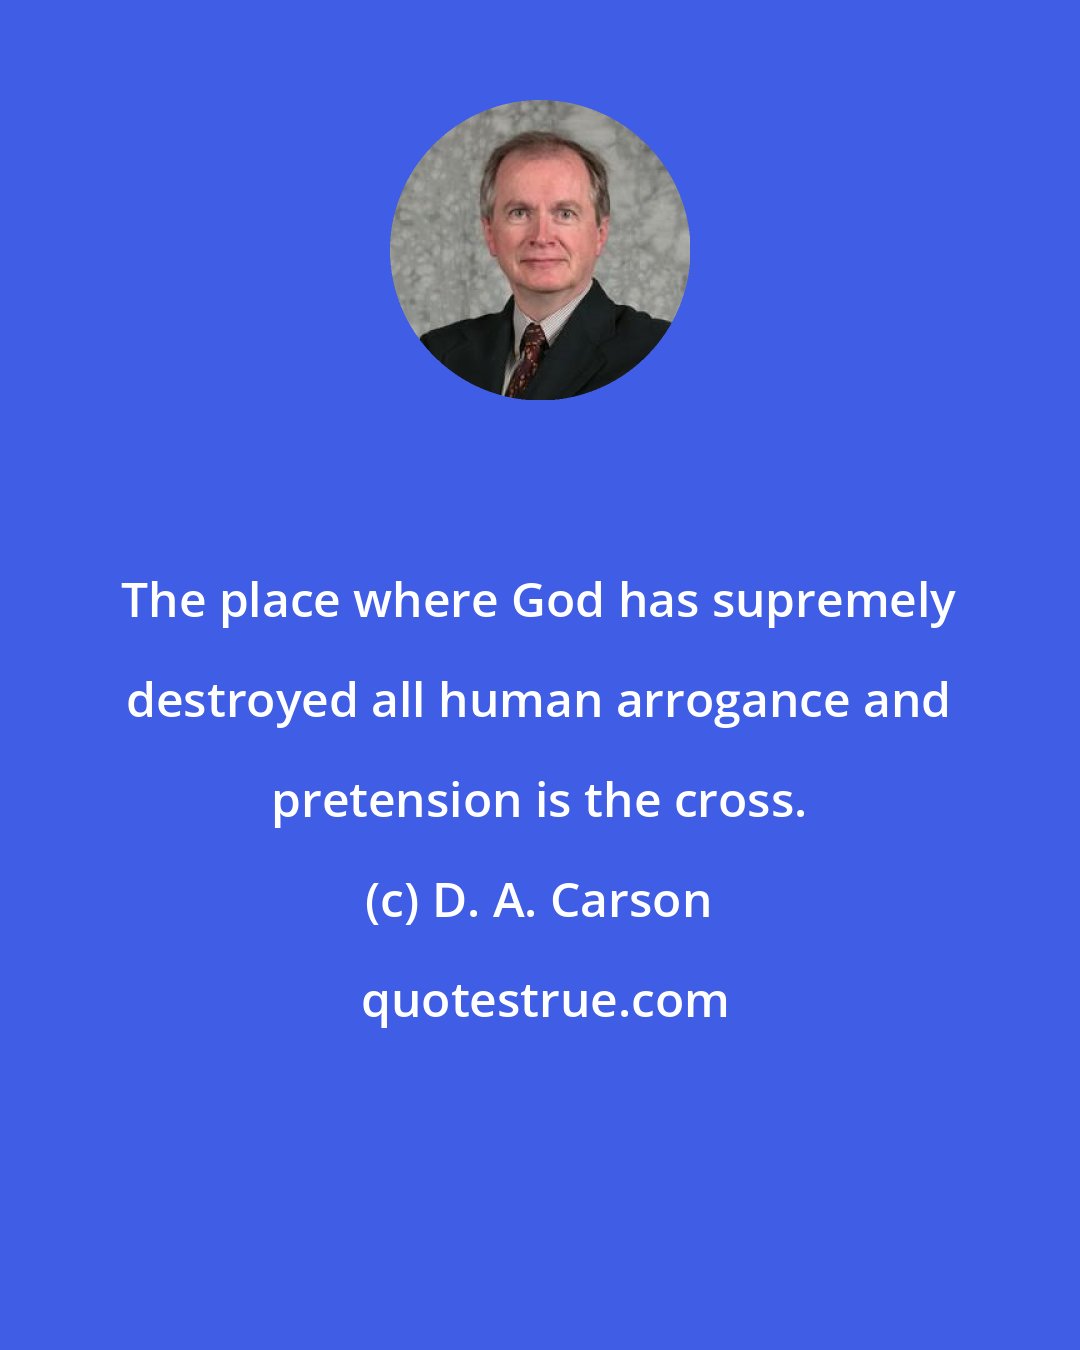 D. A. Carson: The place where God has supremely destroyed all human arrogance and pretension is the cross.